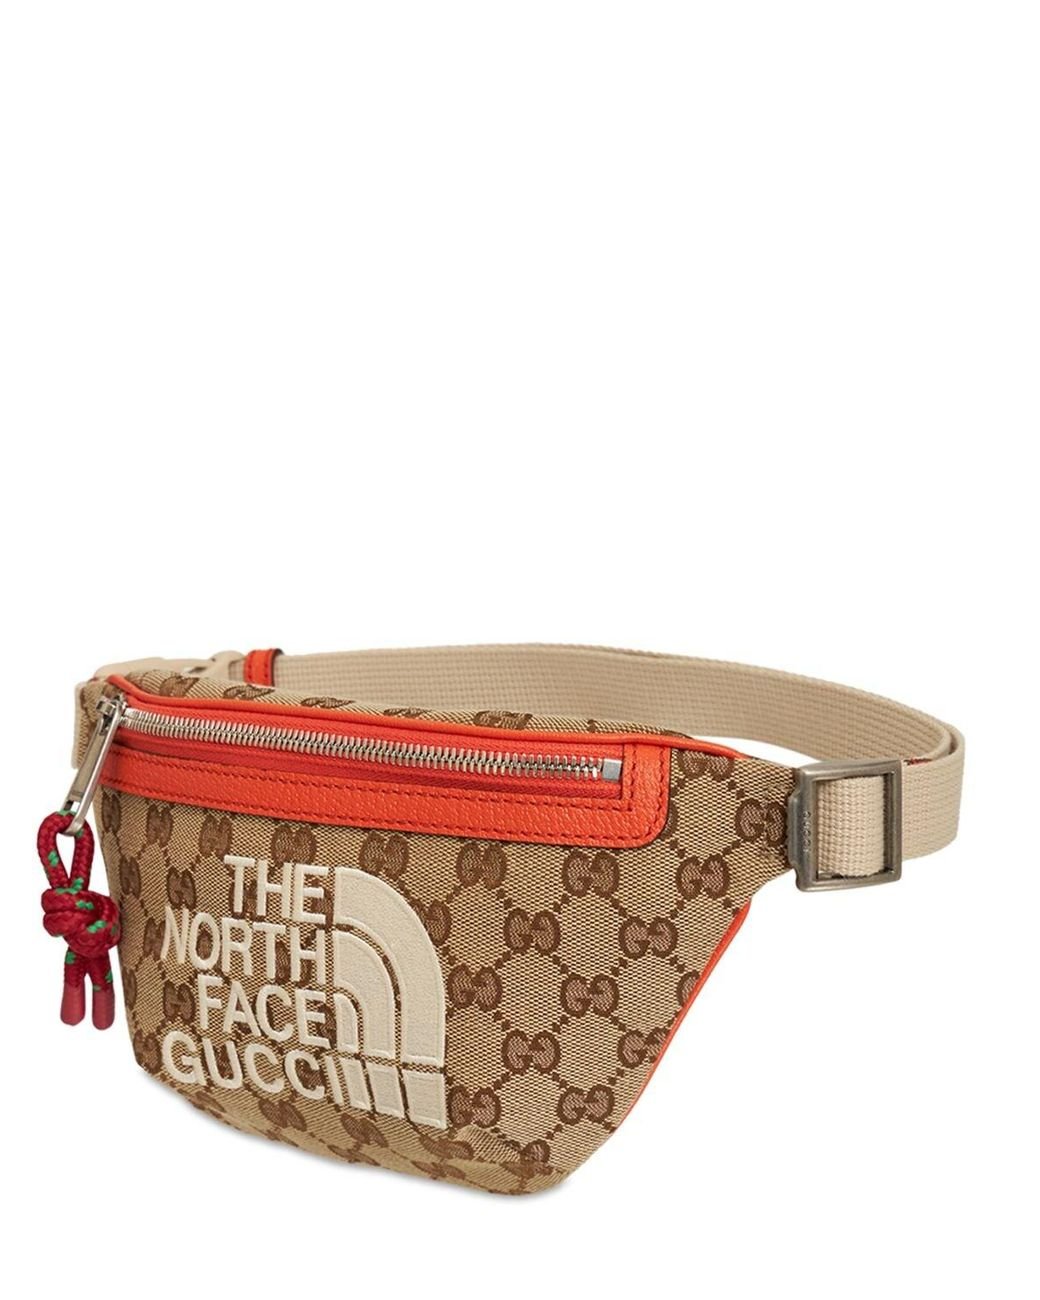 Sac Banane En Toile X The North Face Gg Gucci pour homme | Lyst